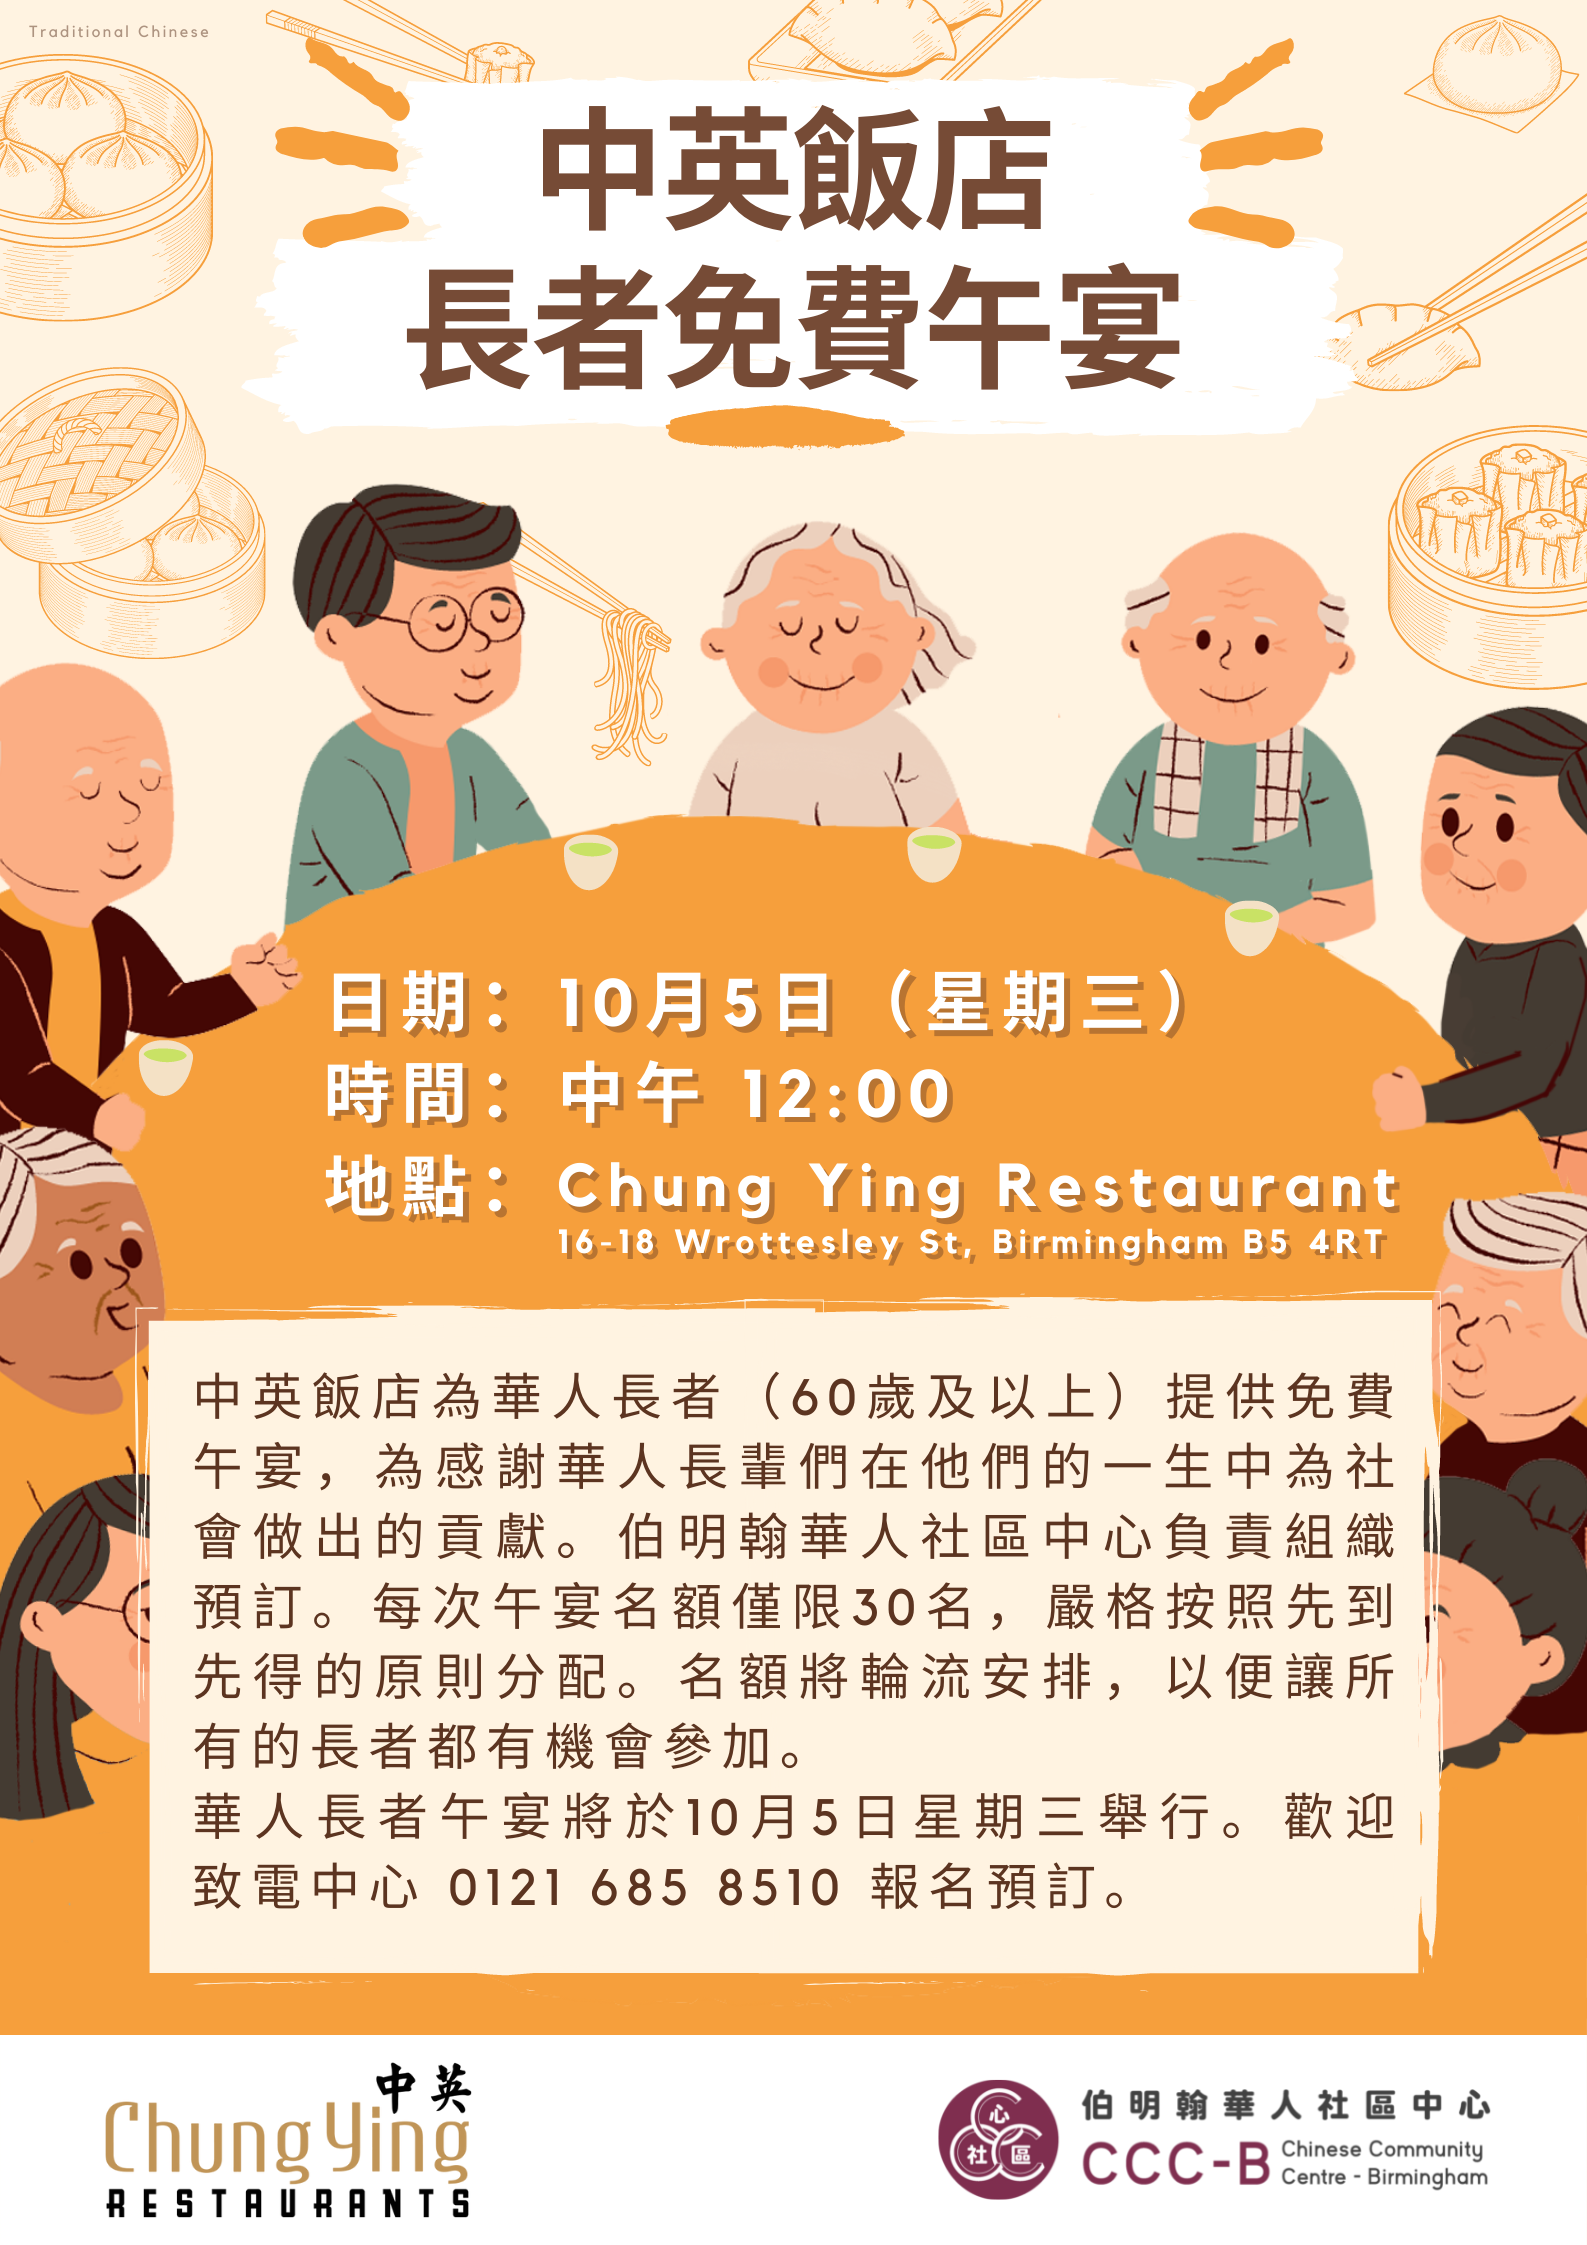 October Free luncheon for elders at Chung Ying Restaurant – 中英飯店長者免費午宴